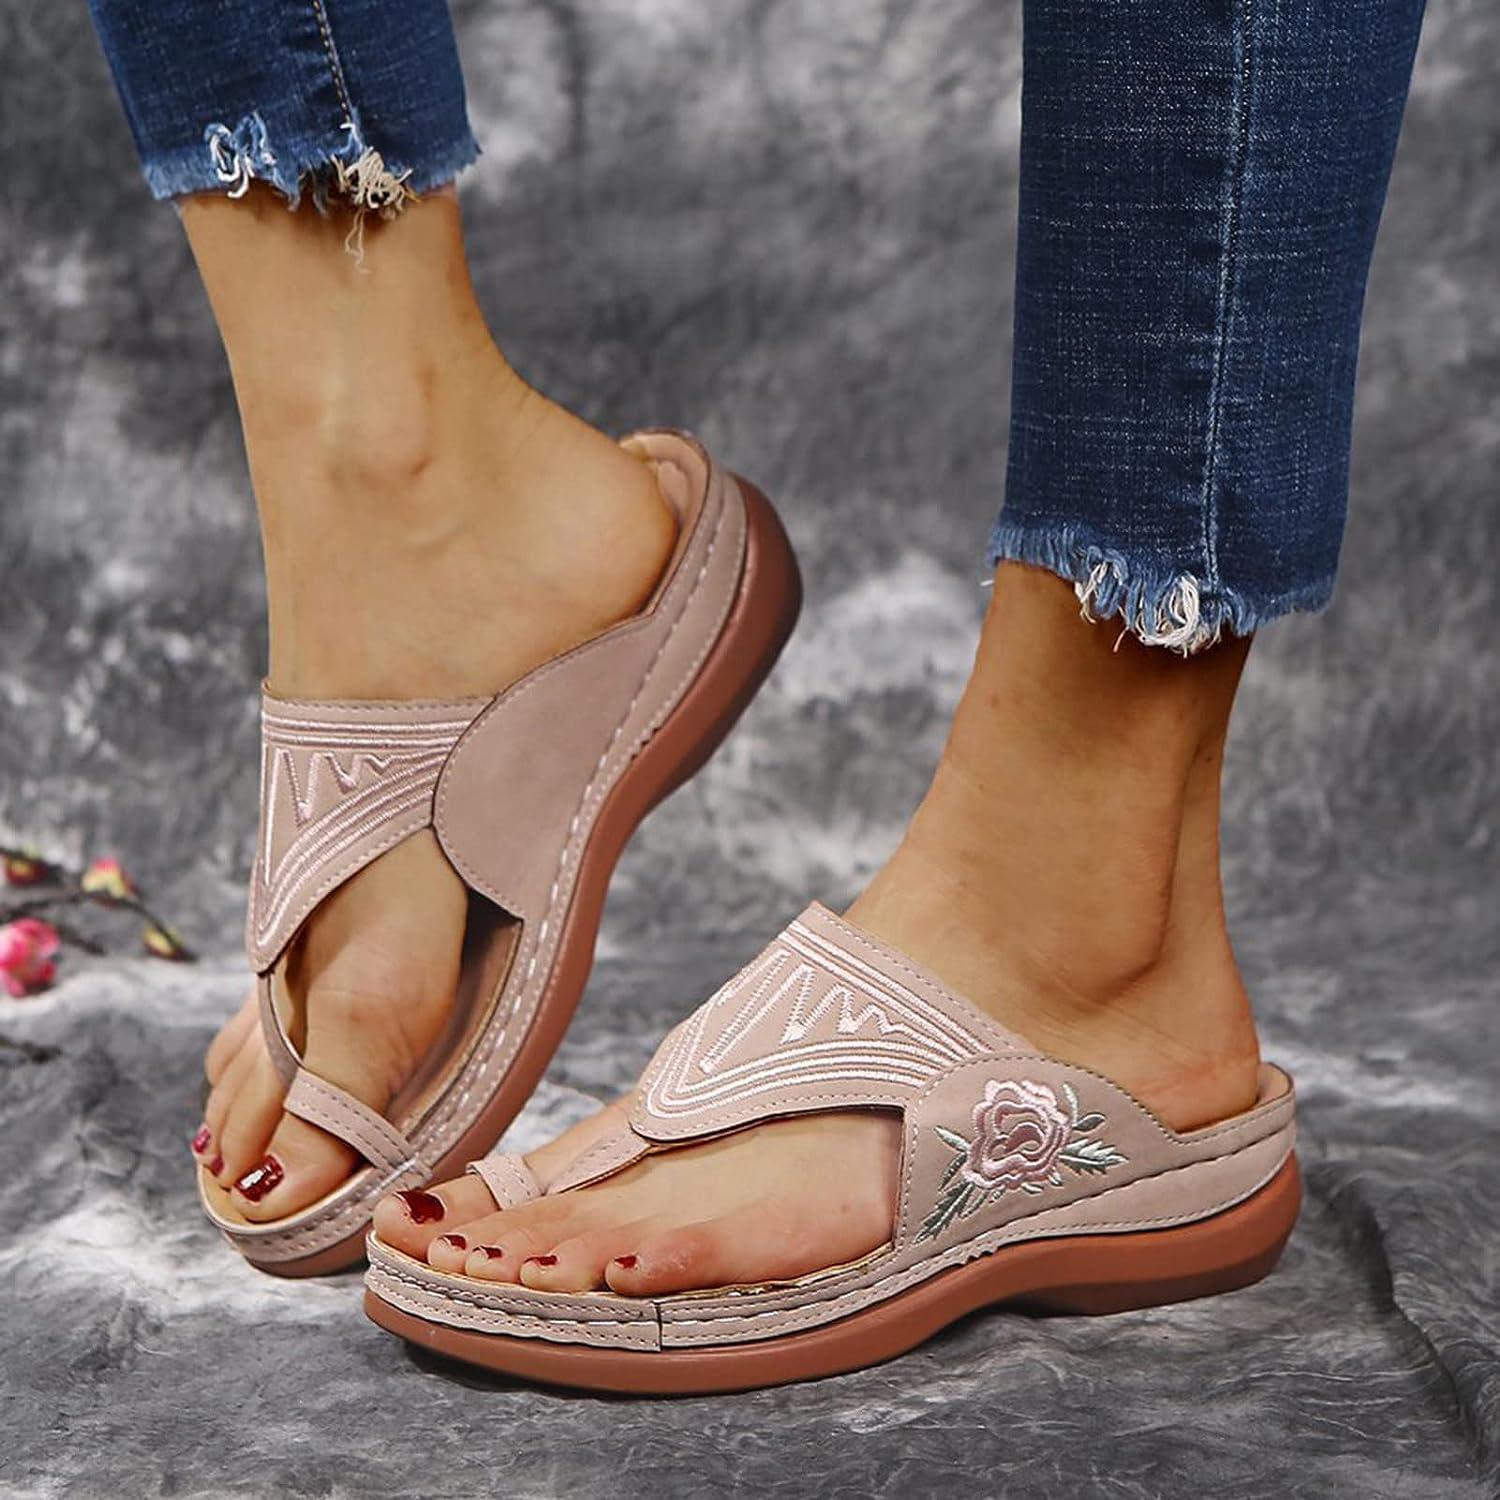 Orthopedic Sandals for Women Arch Support Summer Vintage Foot